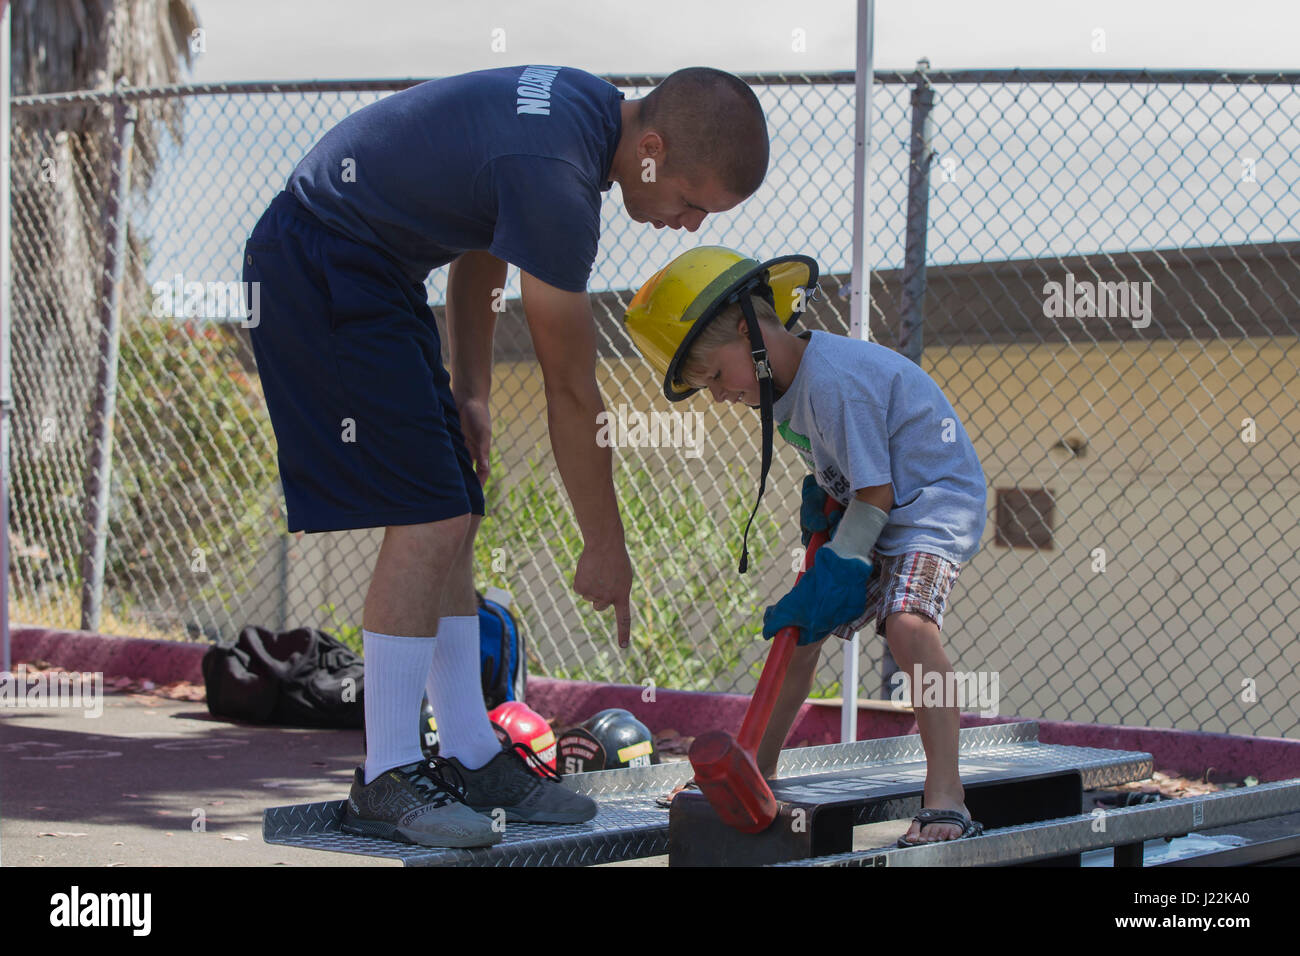 Recruits with the 51st Fire Academy, show children how to use a Keiser Sled, which simulates forcible entry into a building at the 1st Annual City of Oceanside Public Safety Fair at El Camino High School football field in Oceanside, Calif., April 22, 2017. (U.S. Marine Corps photo by Lance Cpl. Brooke Woods) Stock Photo